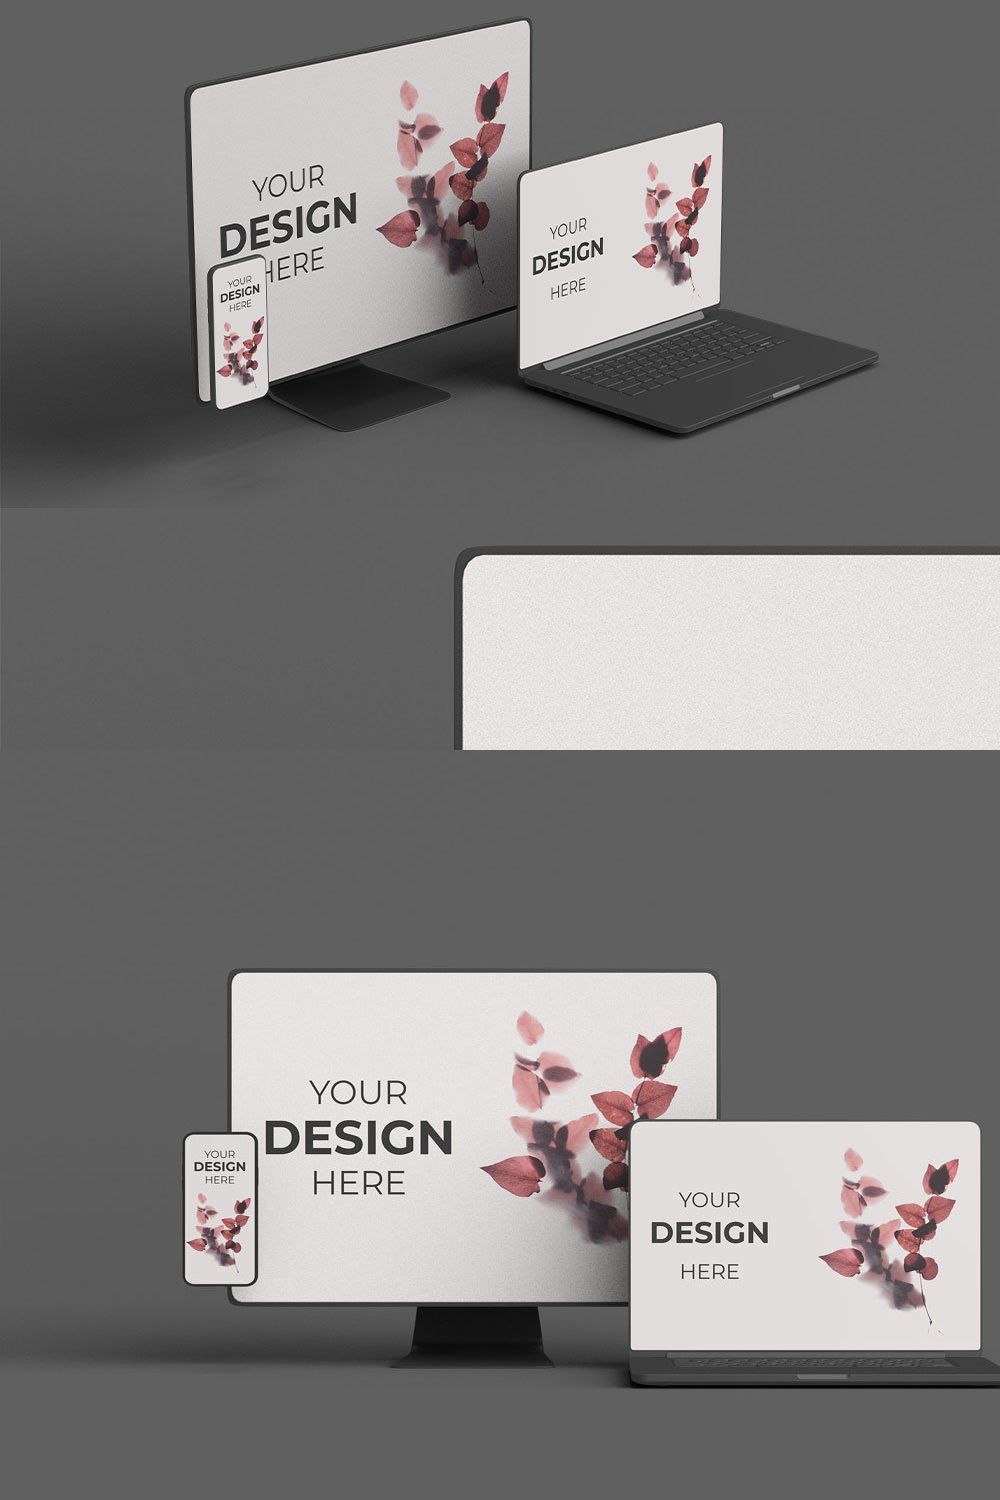 Responsive Devices Mockup pinterest preview image.